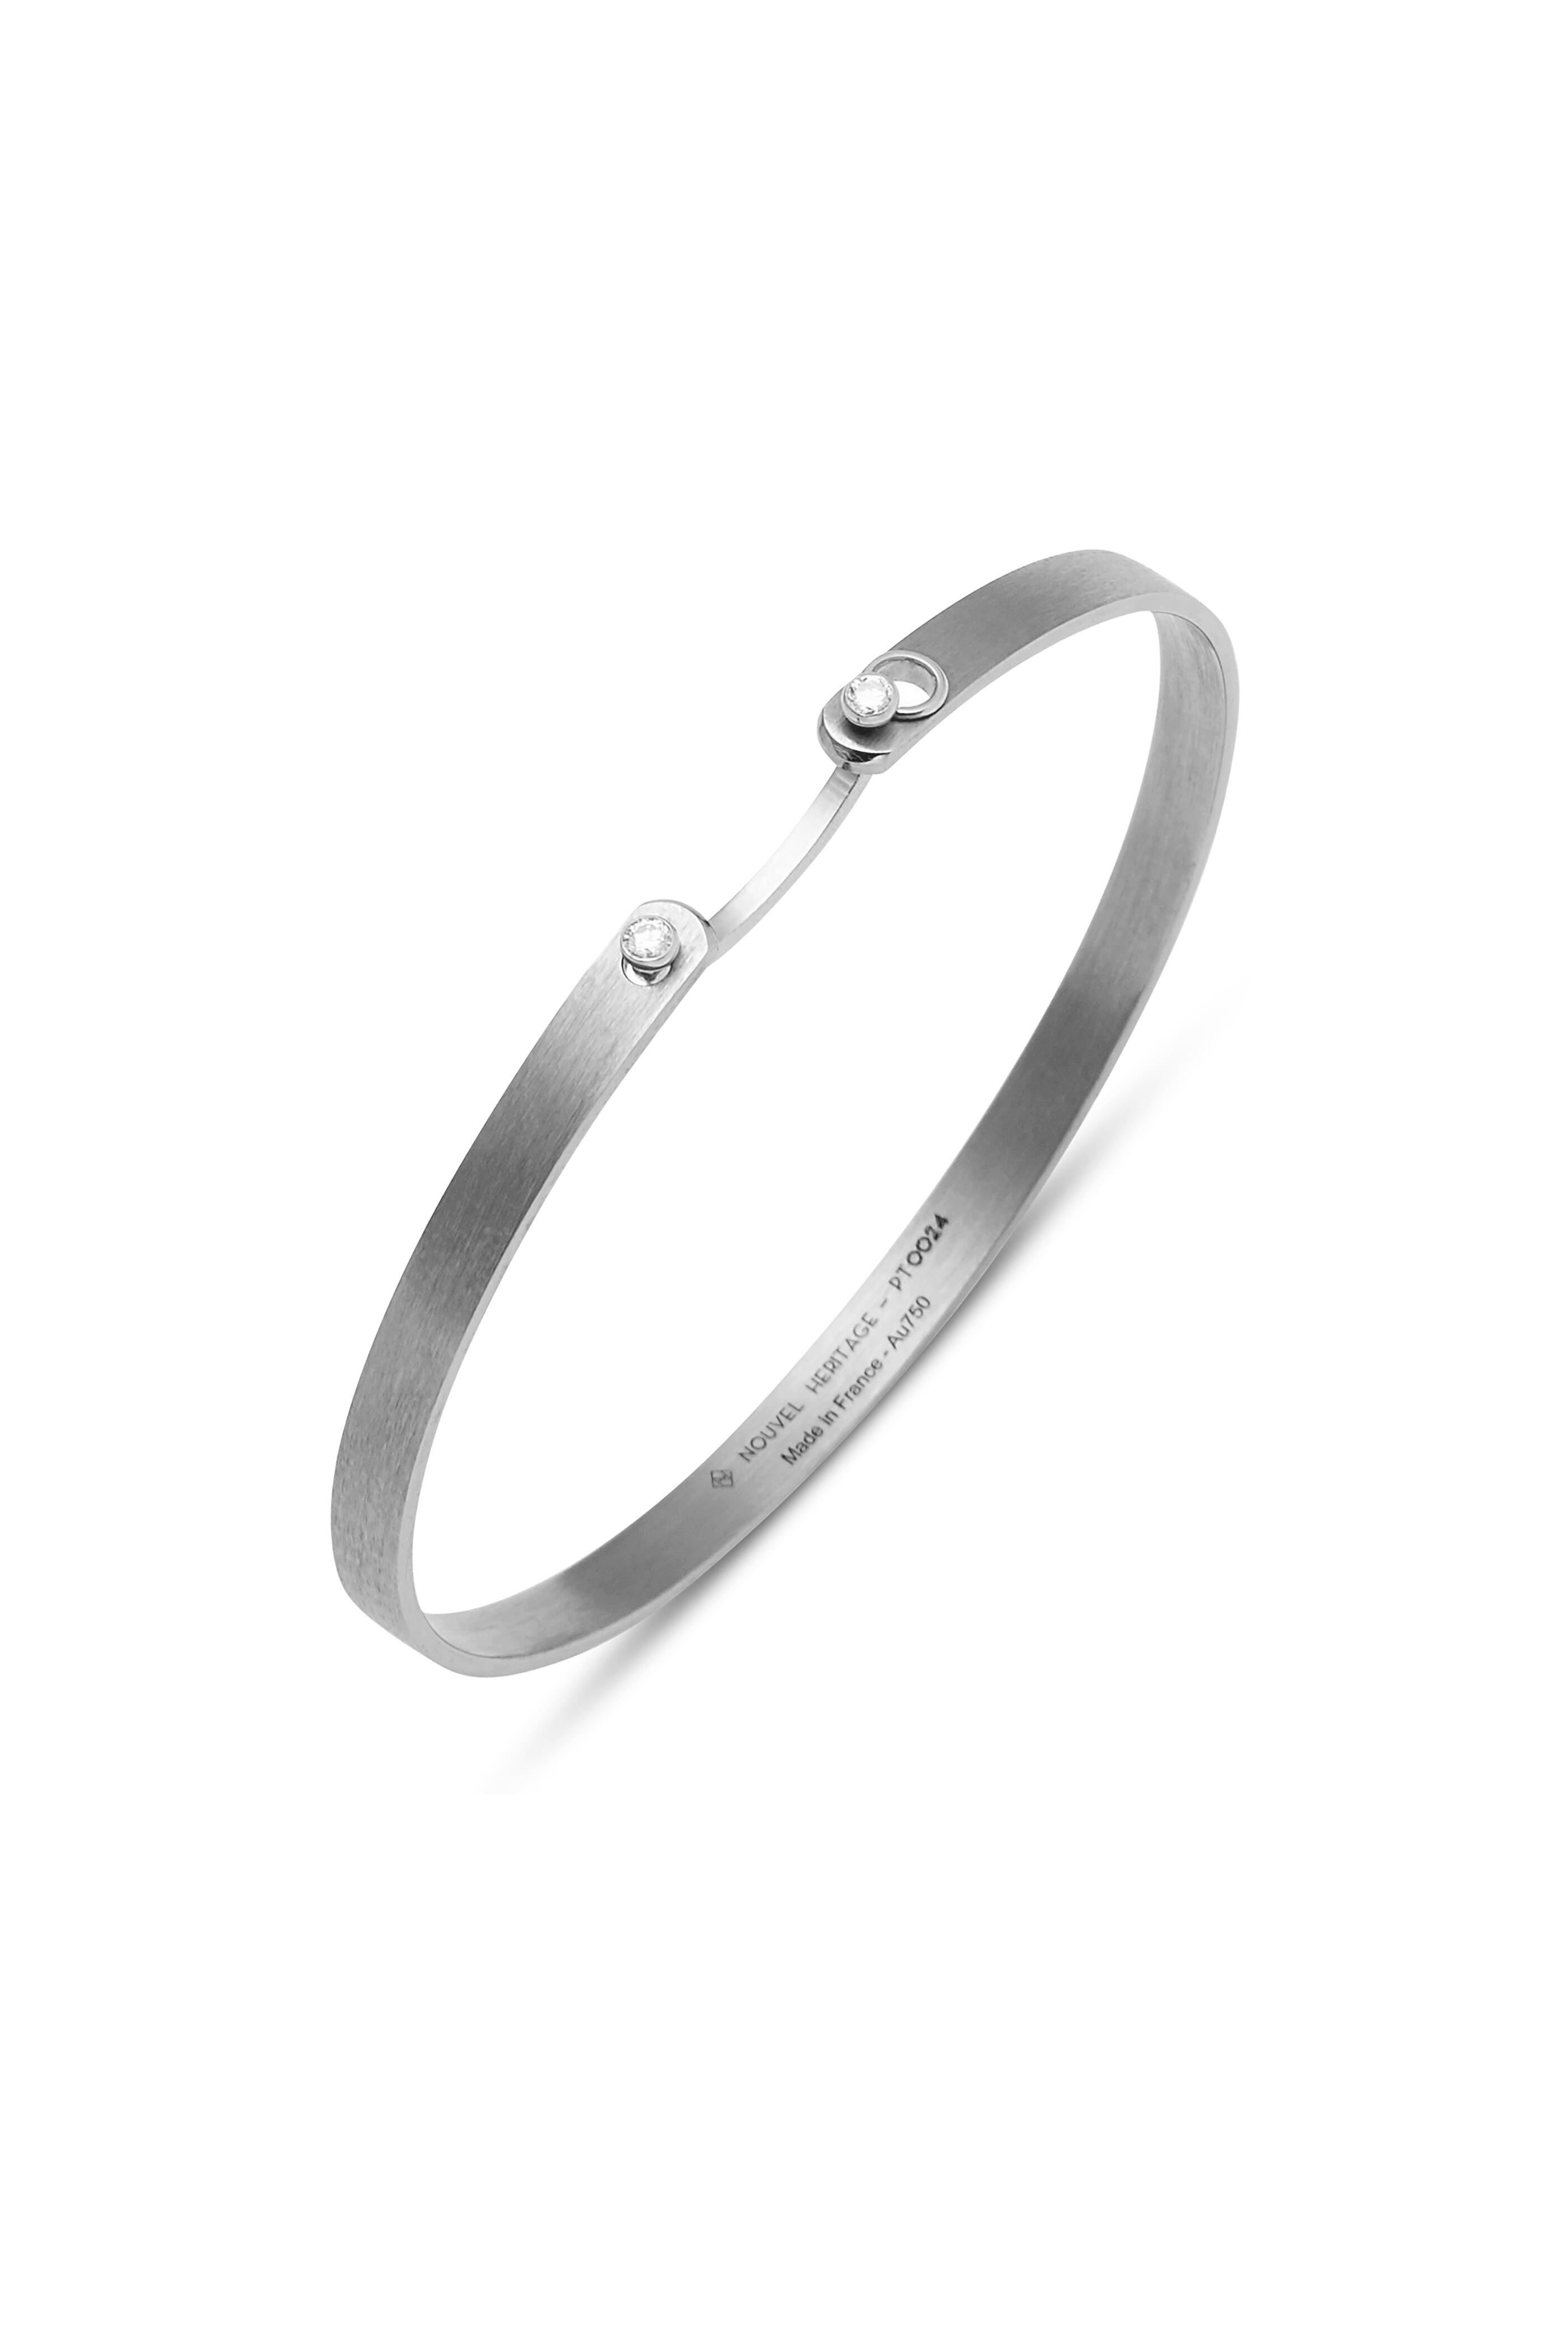 Nouvel Heritage White Gold And Titanium Hers Mood Bangle 7707